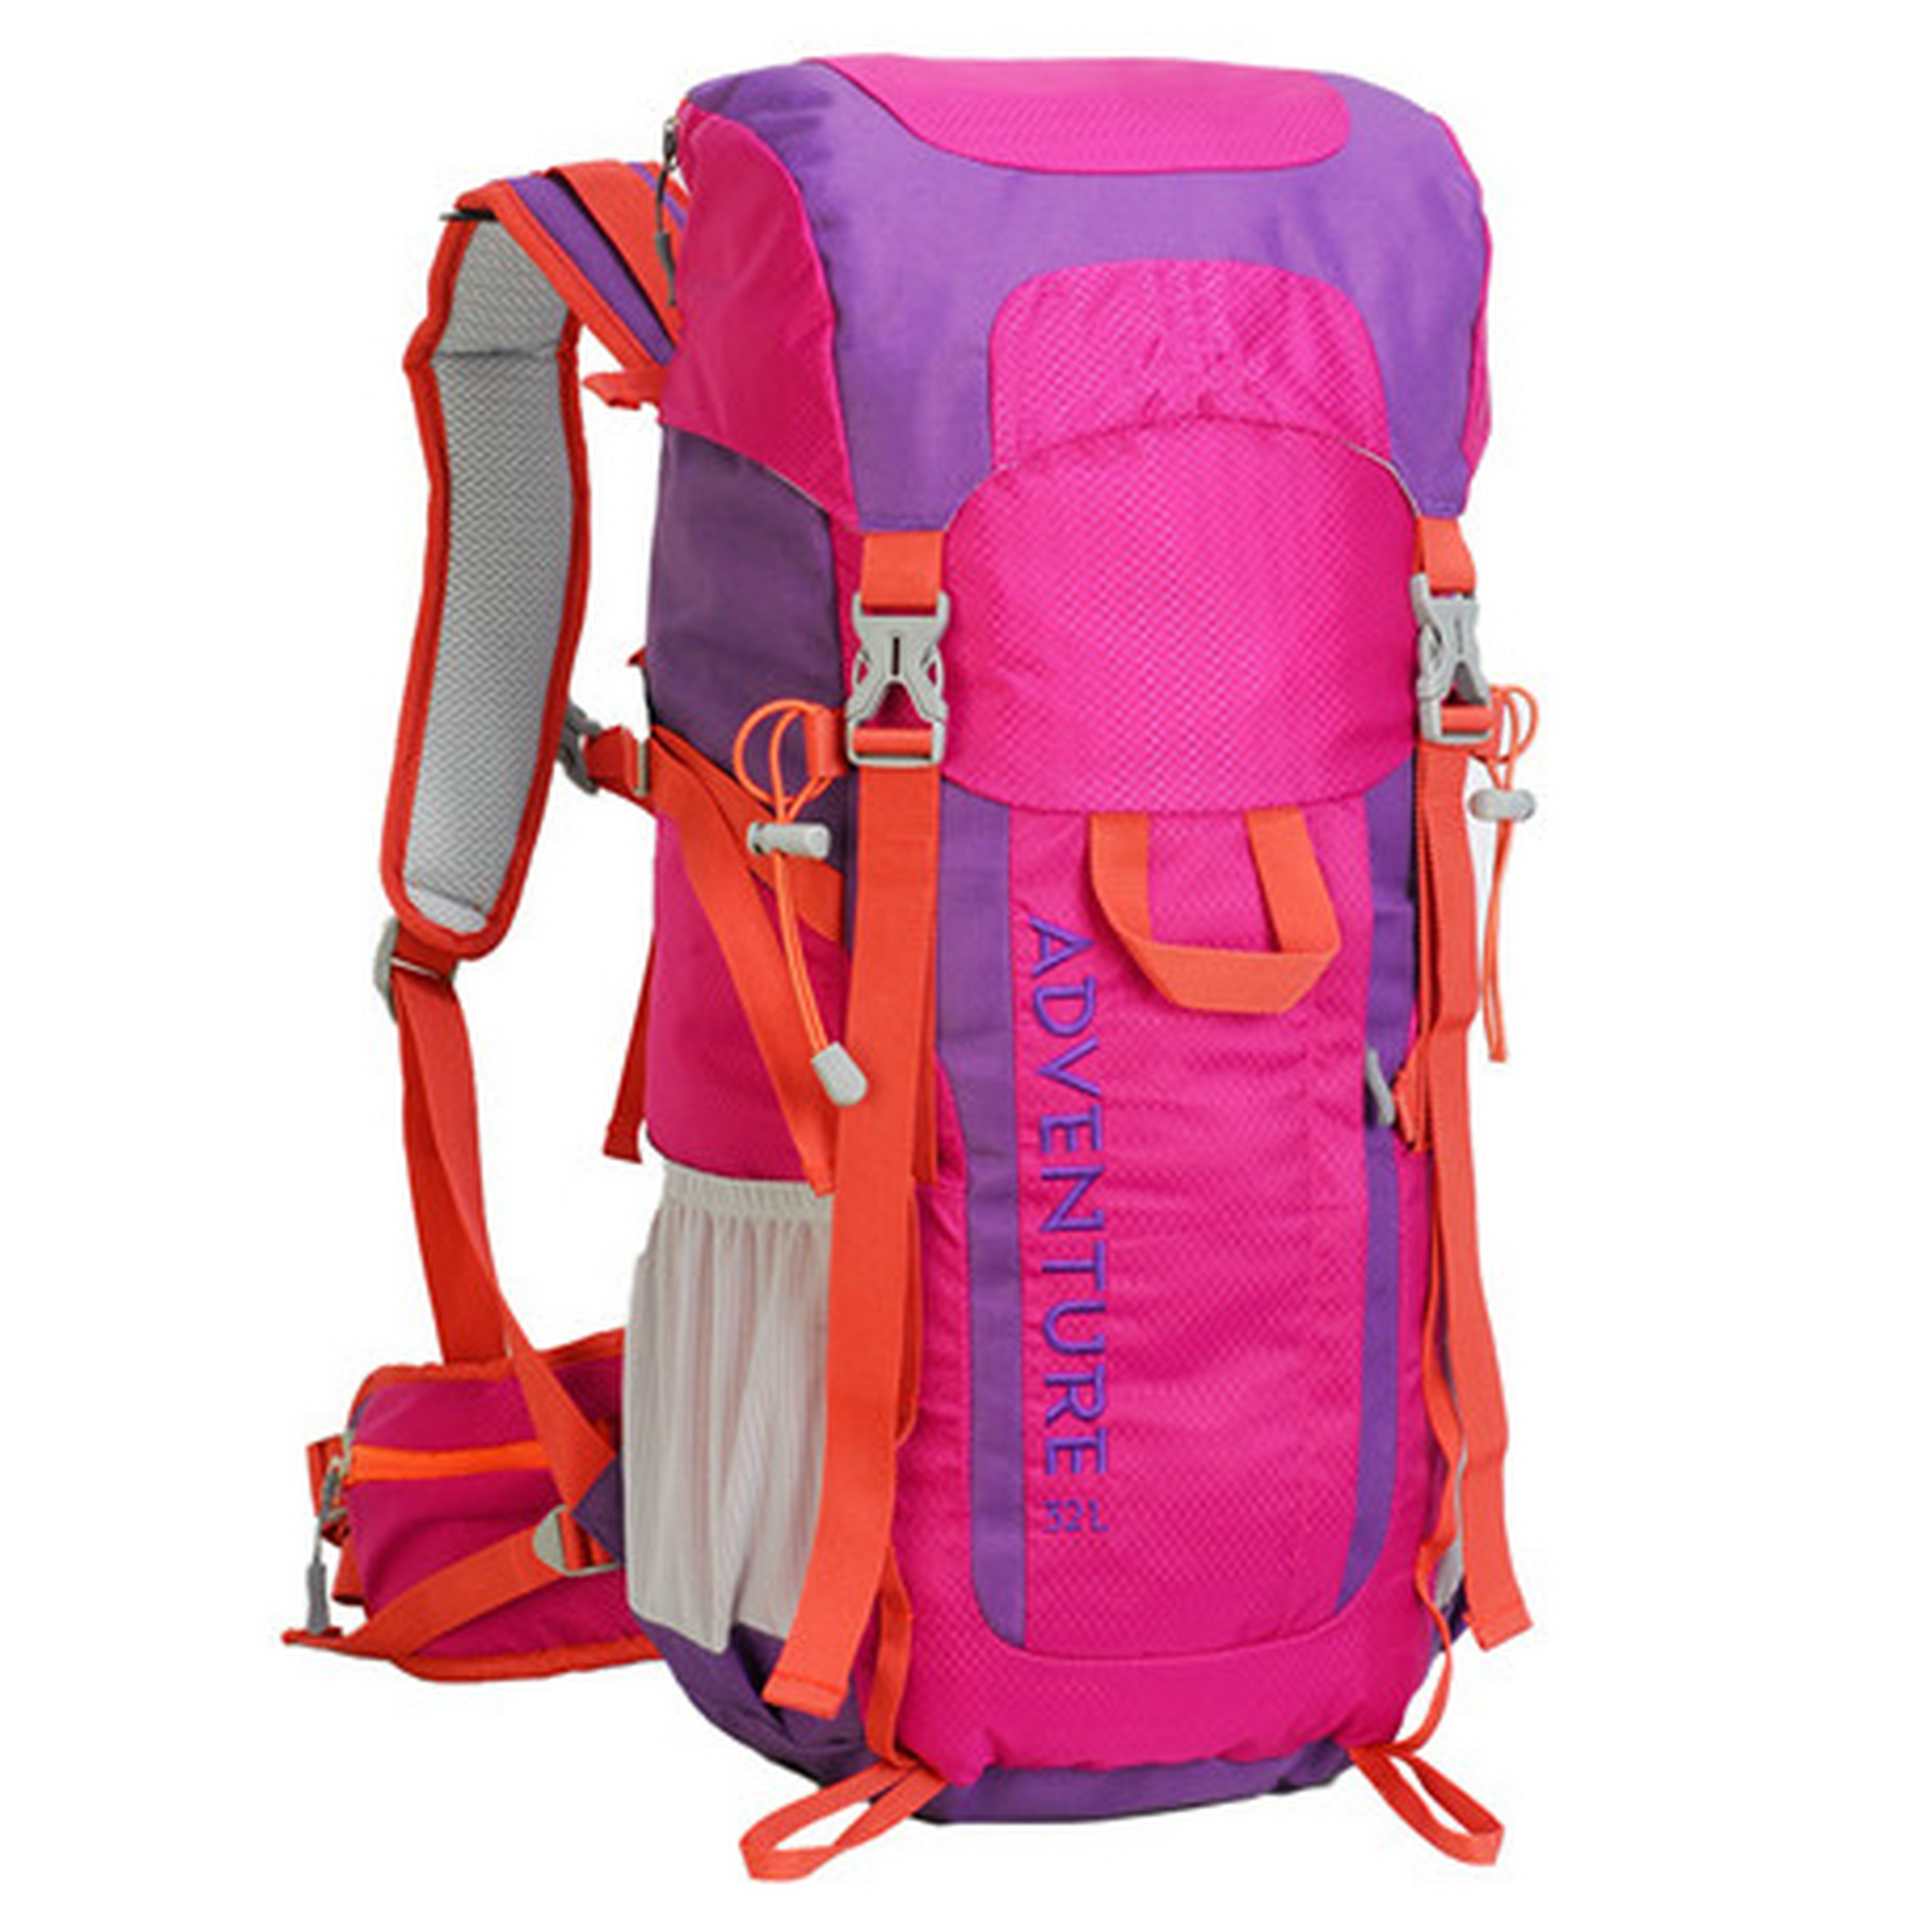 High capacity waterproof hiking backpack for outdoor sports